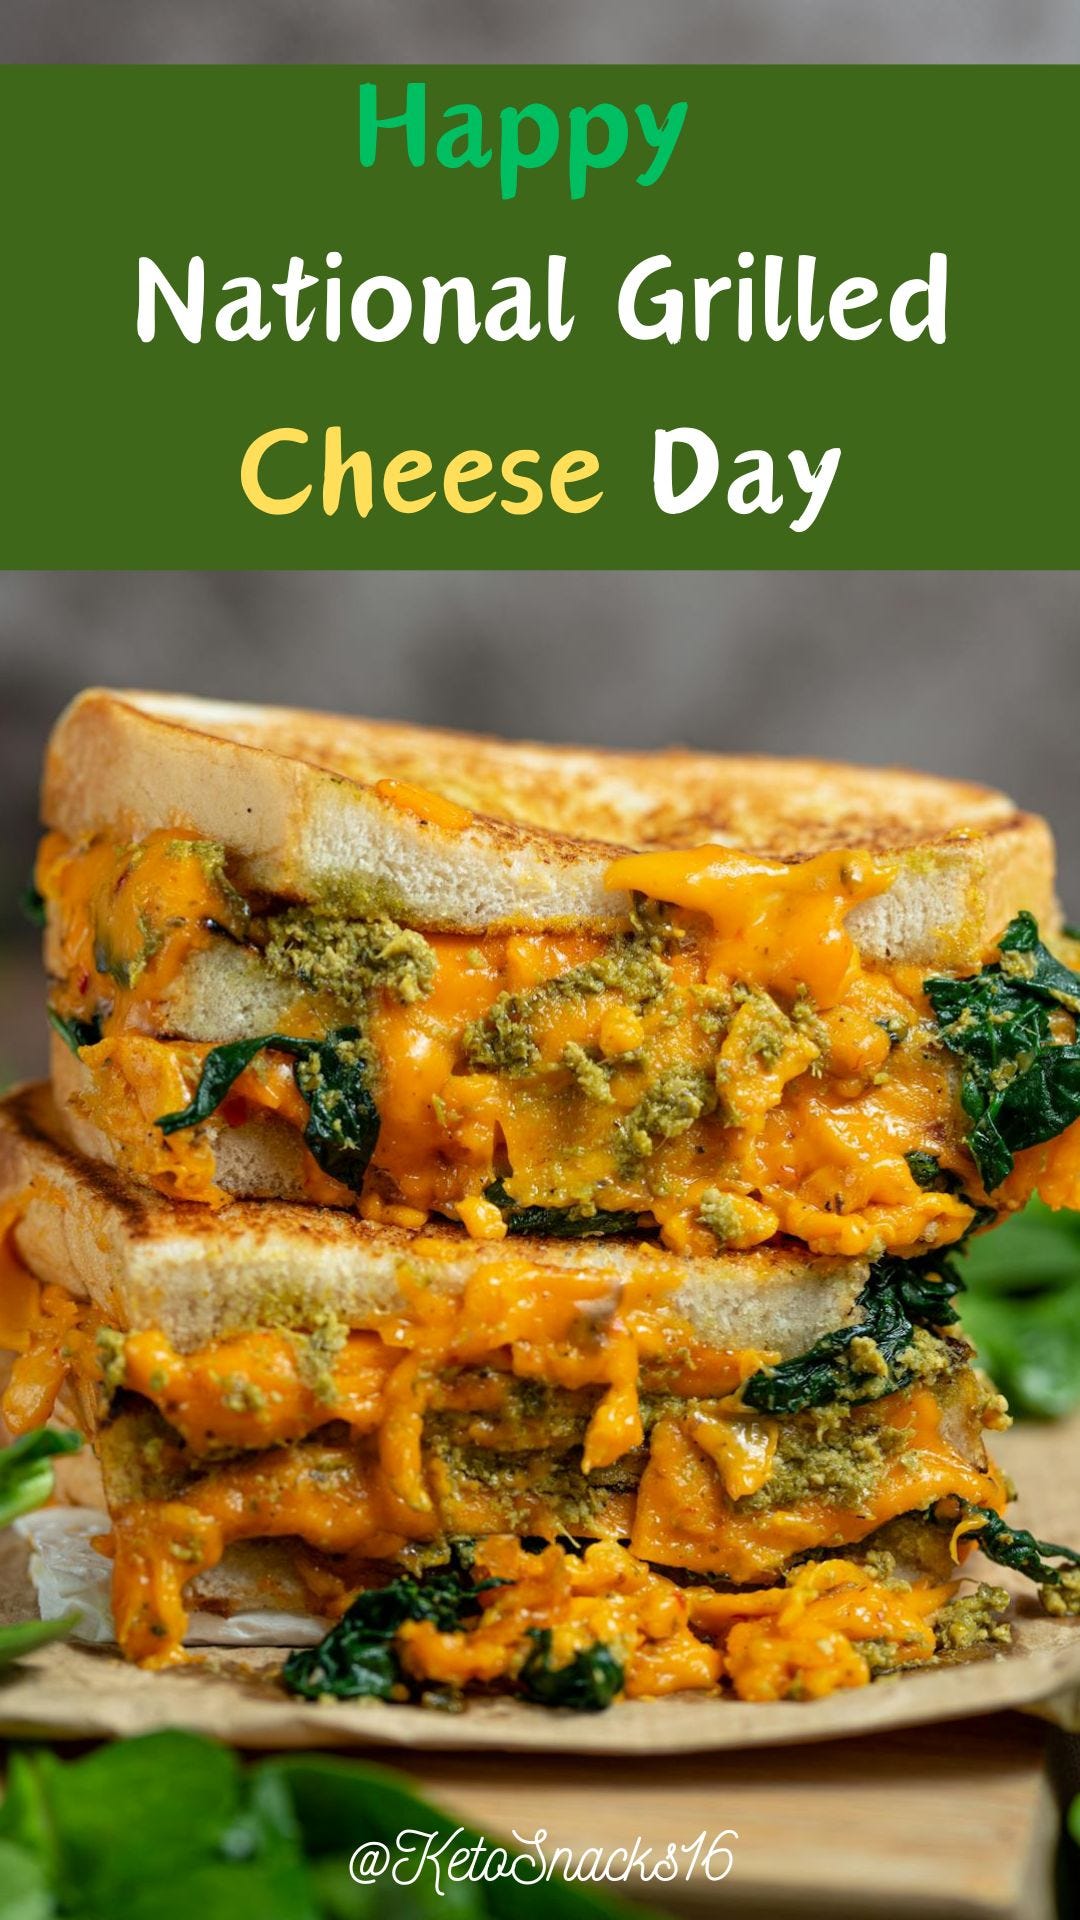 Happy National Grilled Cheese Day! Today We Celebrate a Gourmet Version